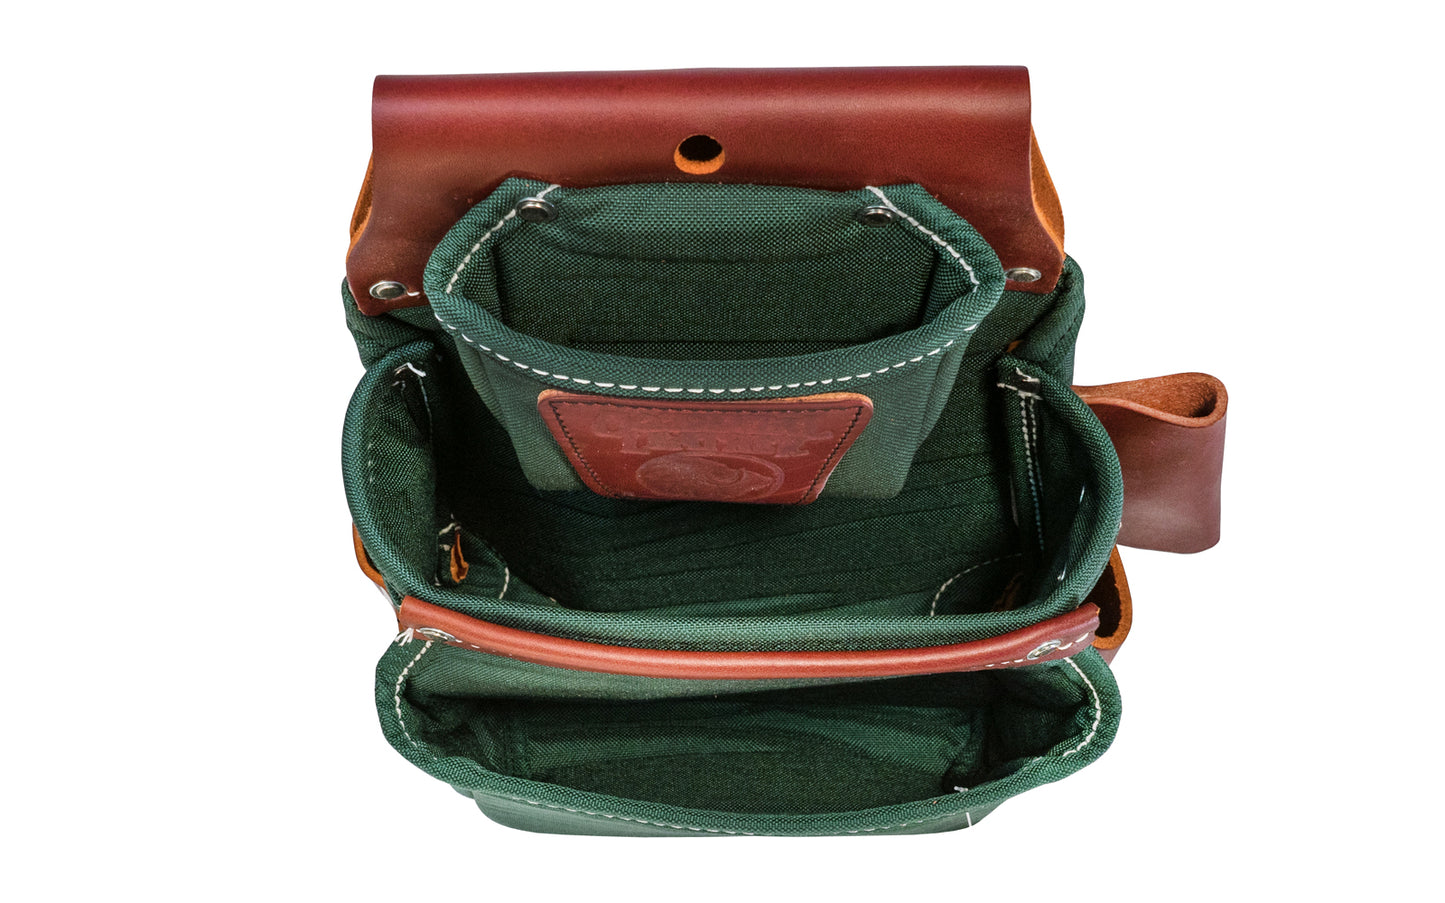 Occidental Leather "Oxy Lights" Green 3-Pouch Fastener Bag ~ Model 8060 - Fits a 3" work belt - Most popular "OxyLights" fastener bag. For framing & general carpentry applications. Holders for 1” blade square, angle square, cat’s paw loop, driver bits. Made of Nylon & genuine Leather - 9 total pockets & tool holders.